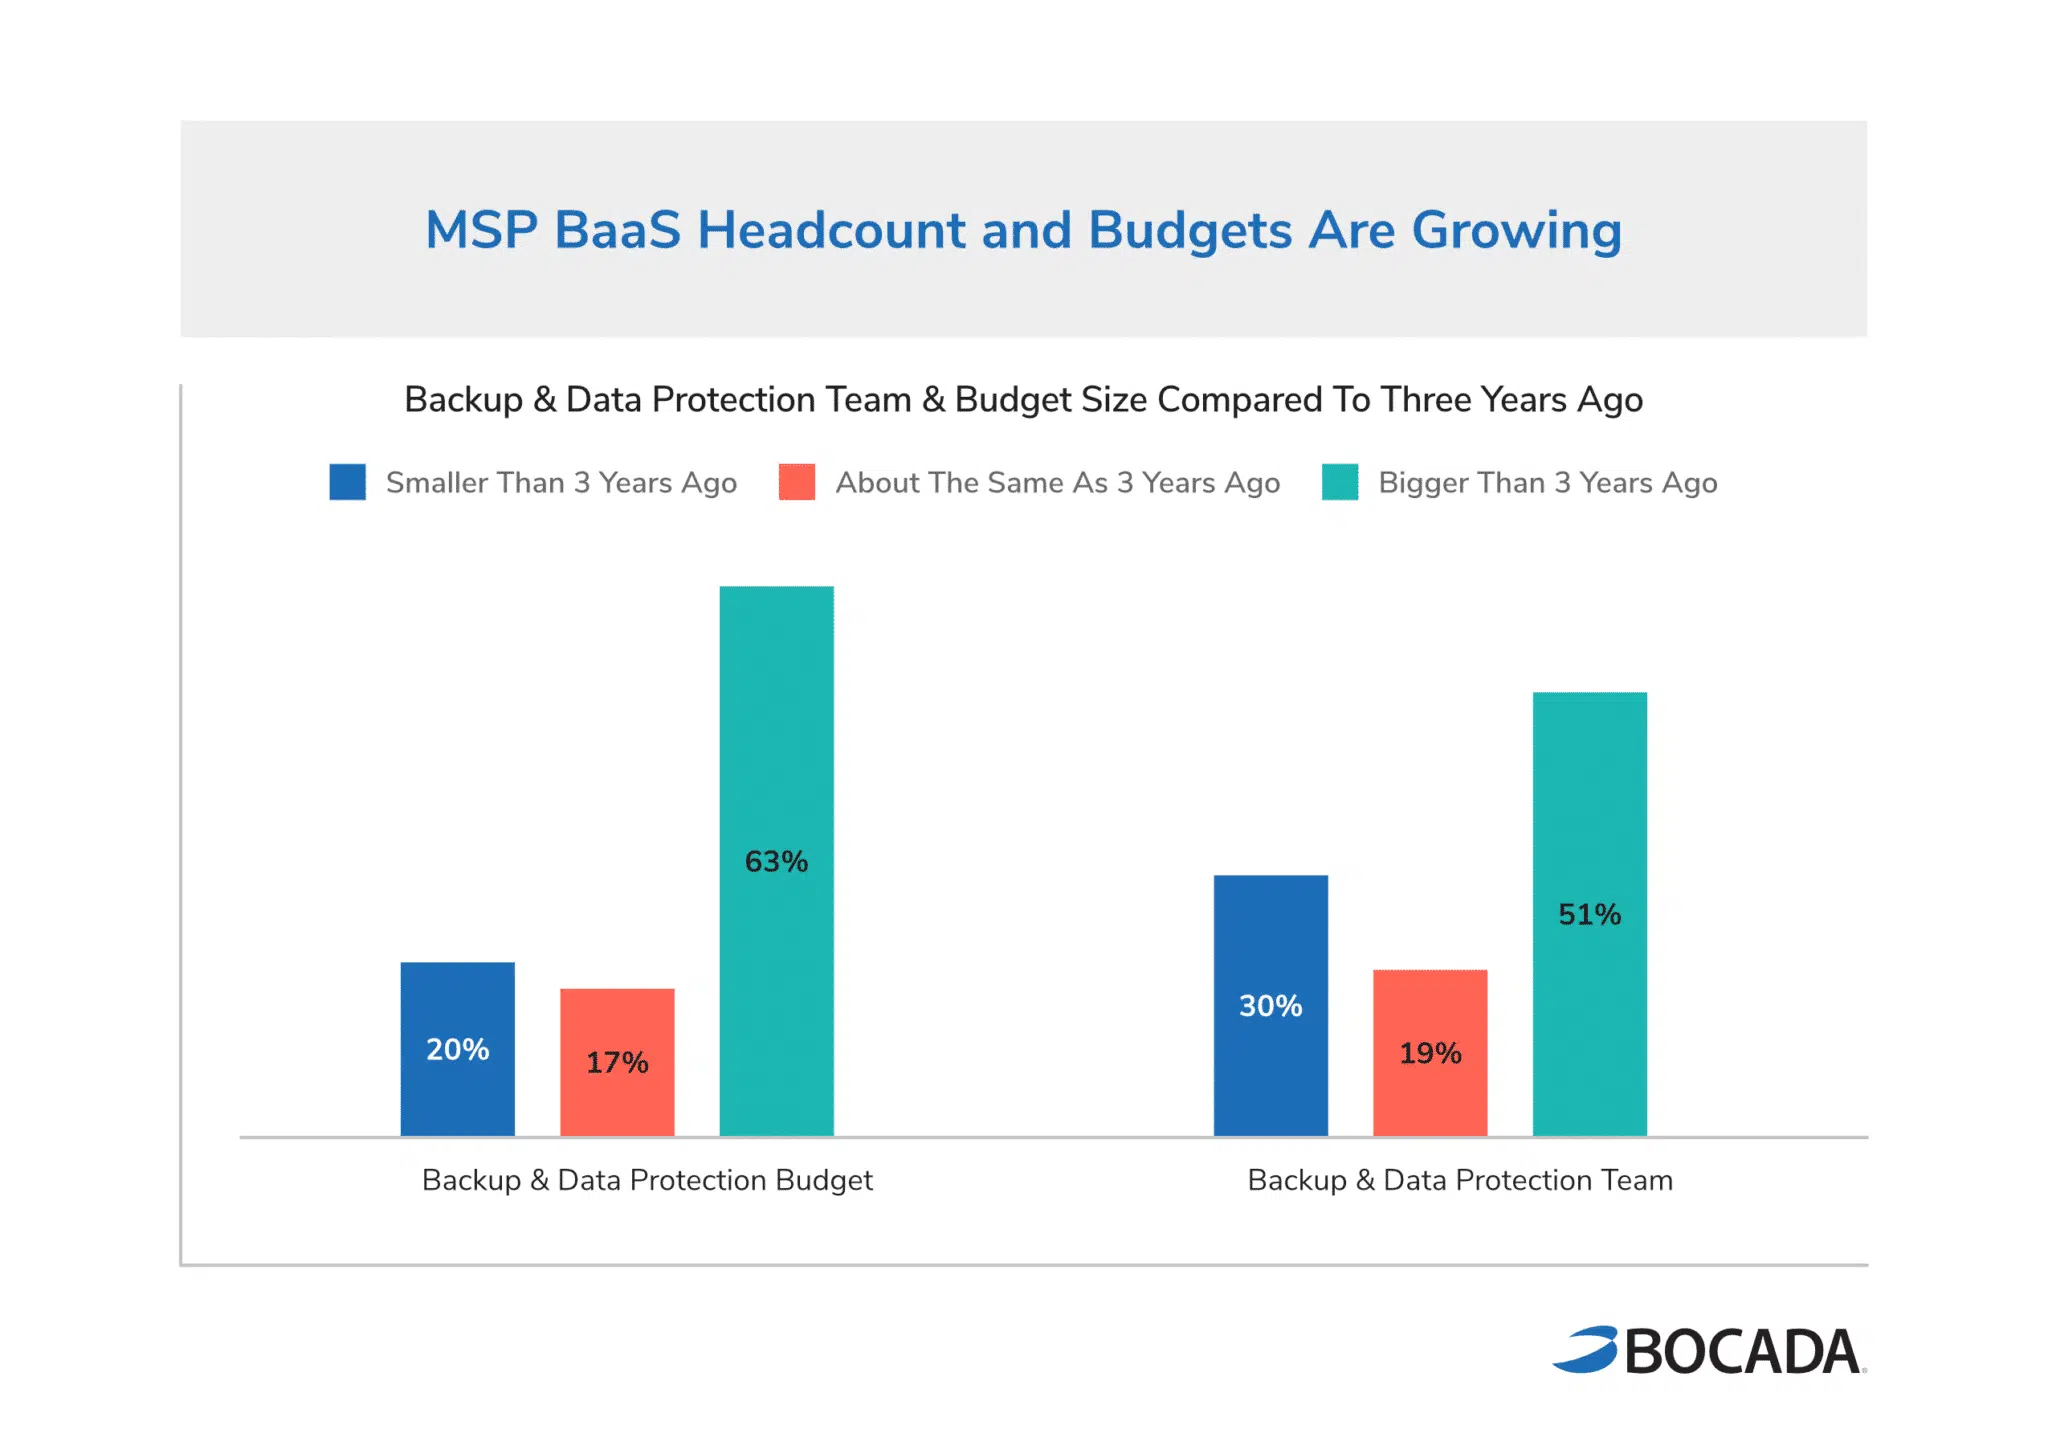 MSP Backup and Data Protection Team Headcount & Budget Trends